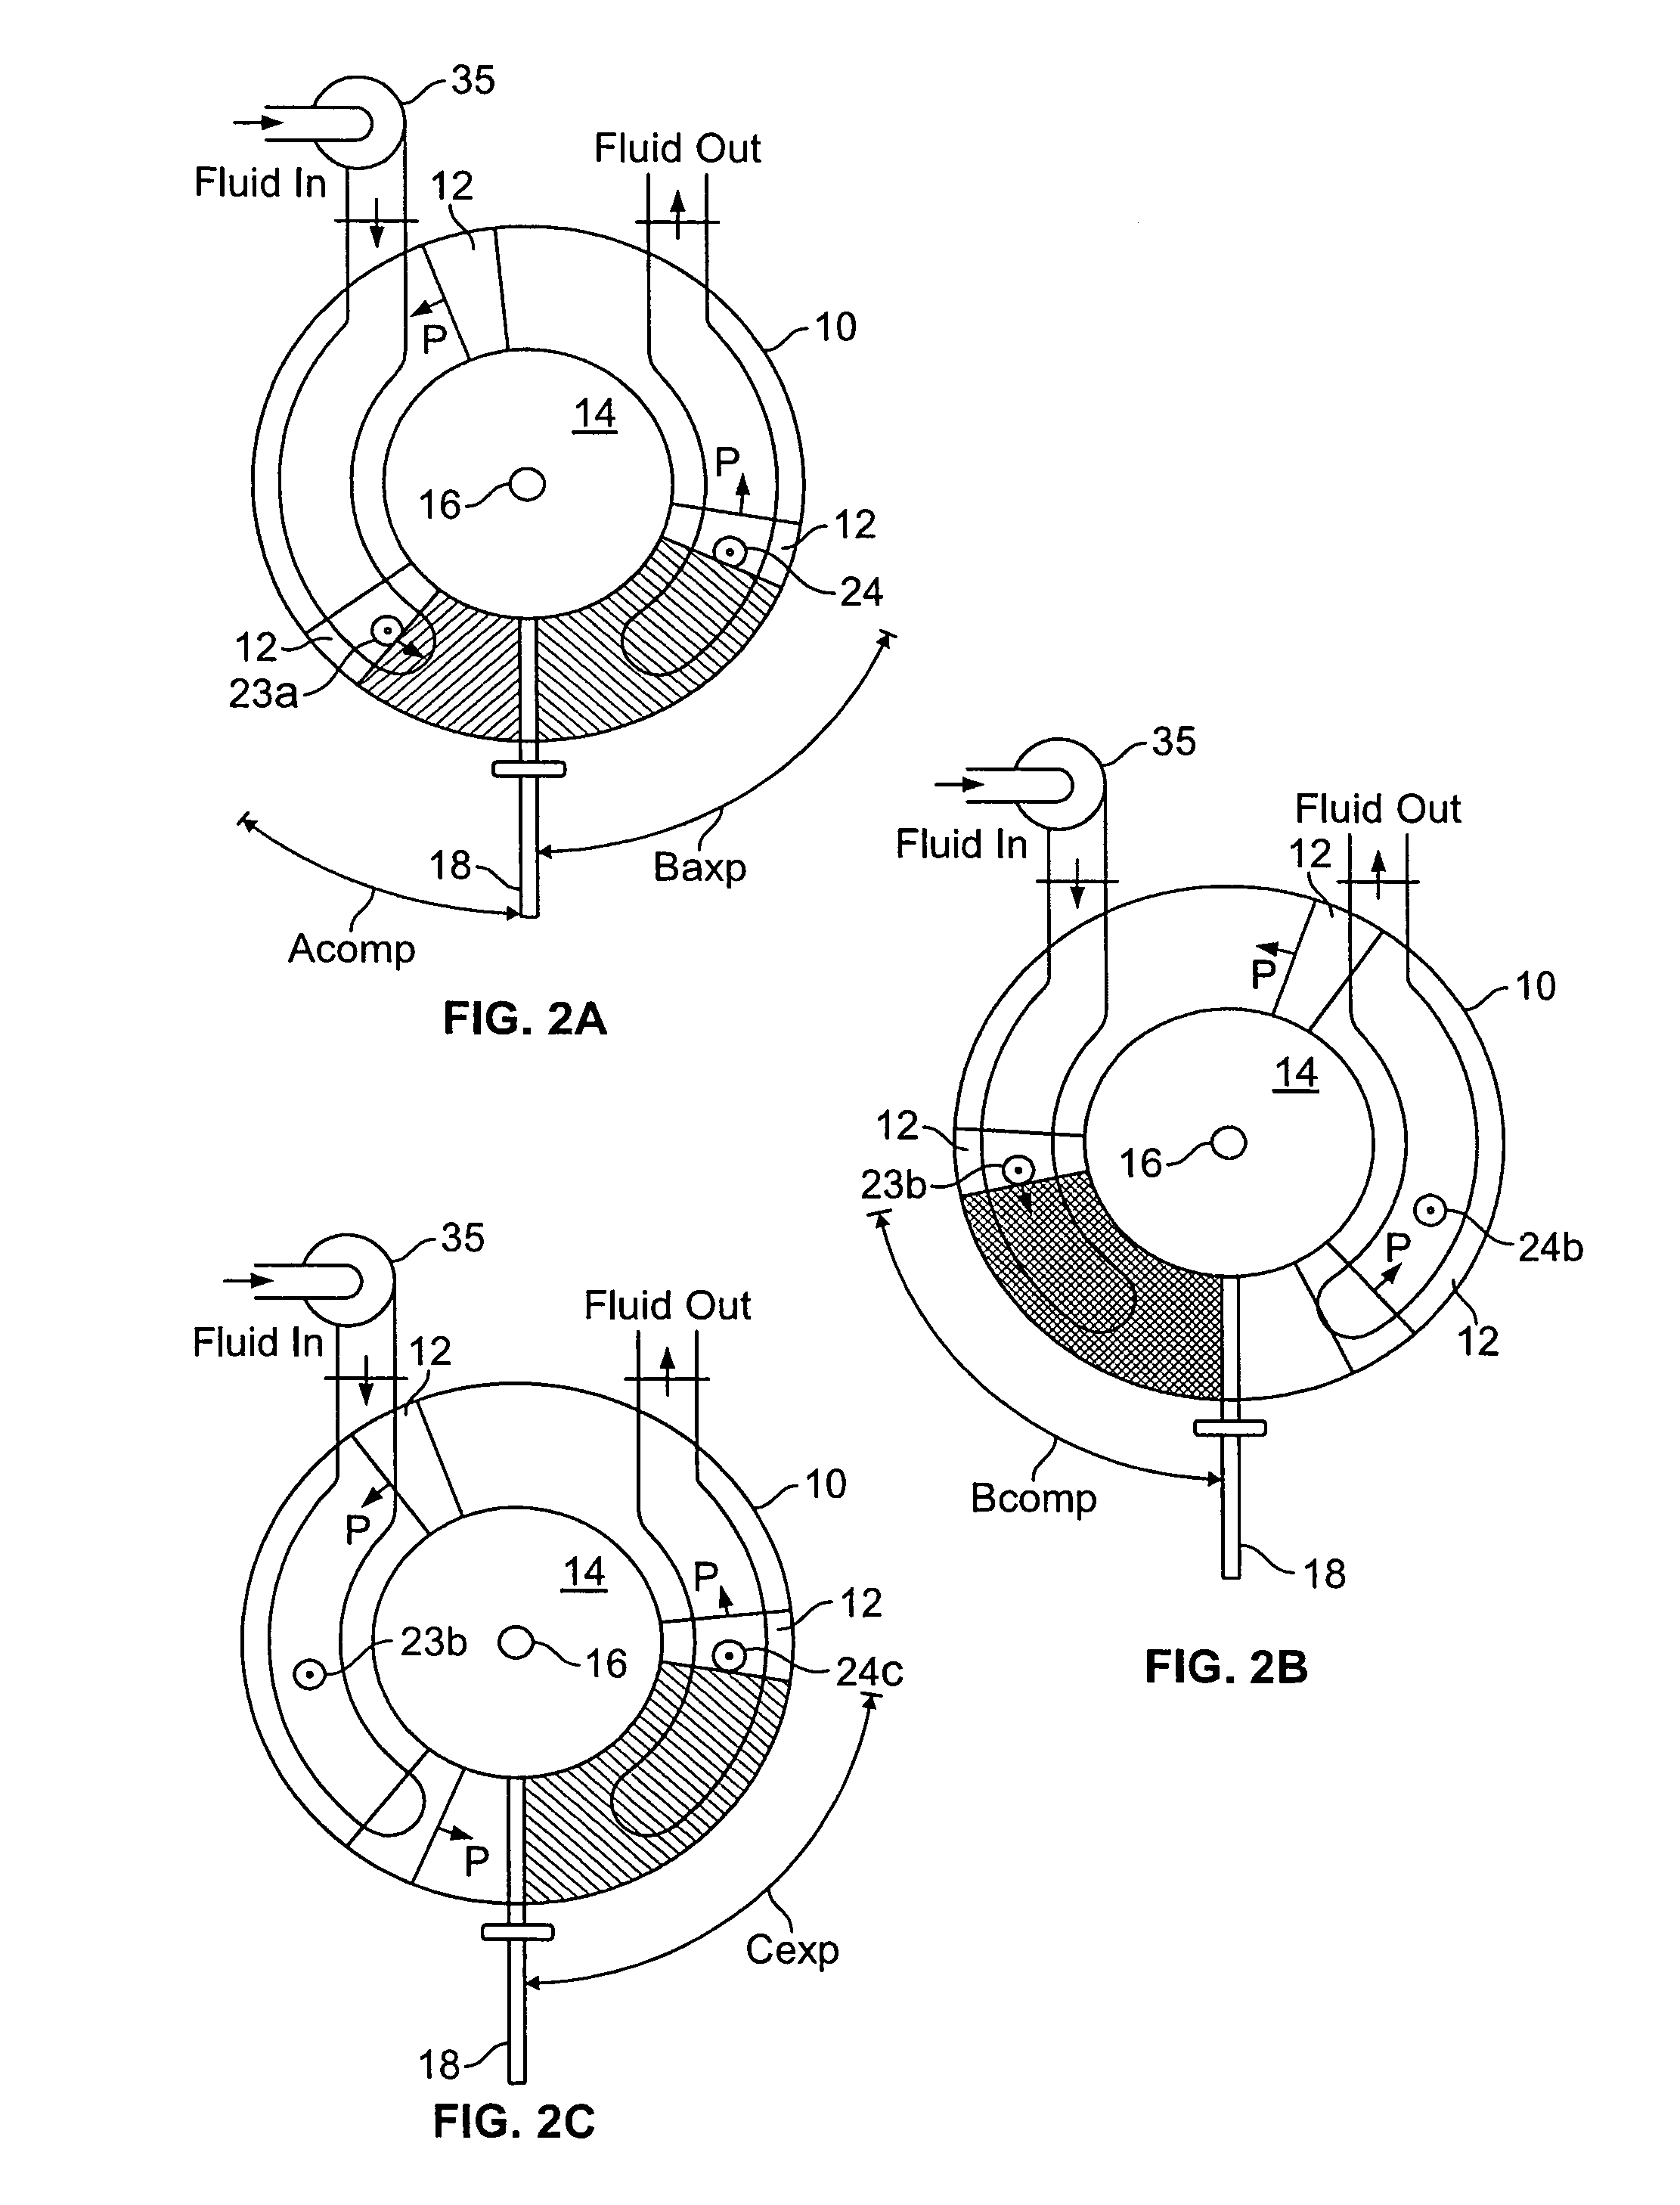 Toroidal engine with variable displacement volume